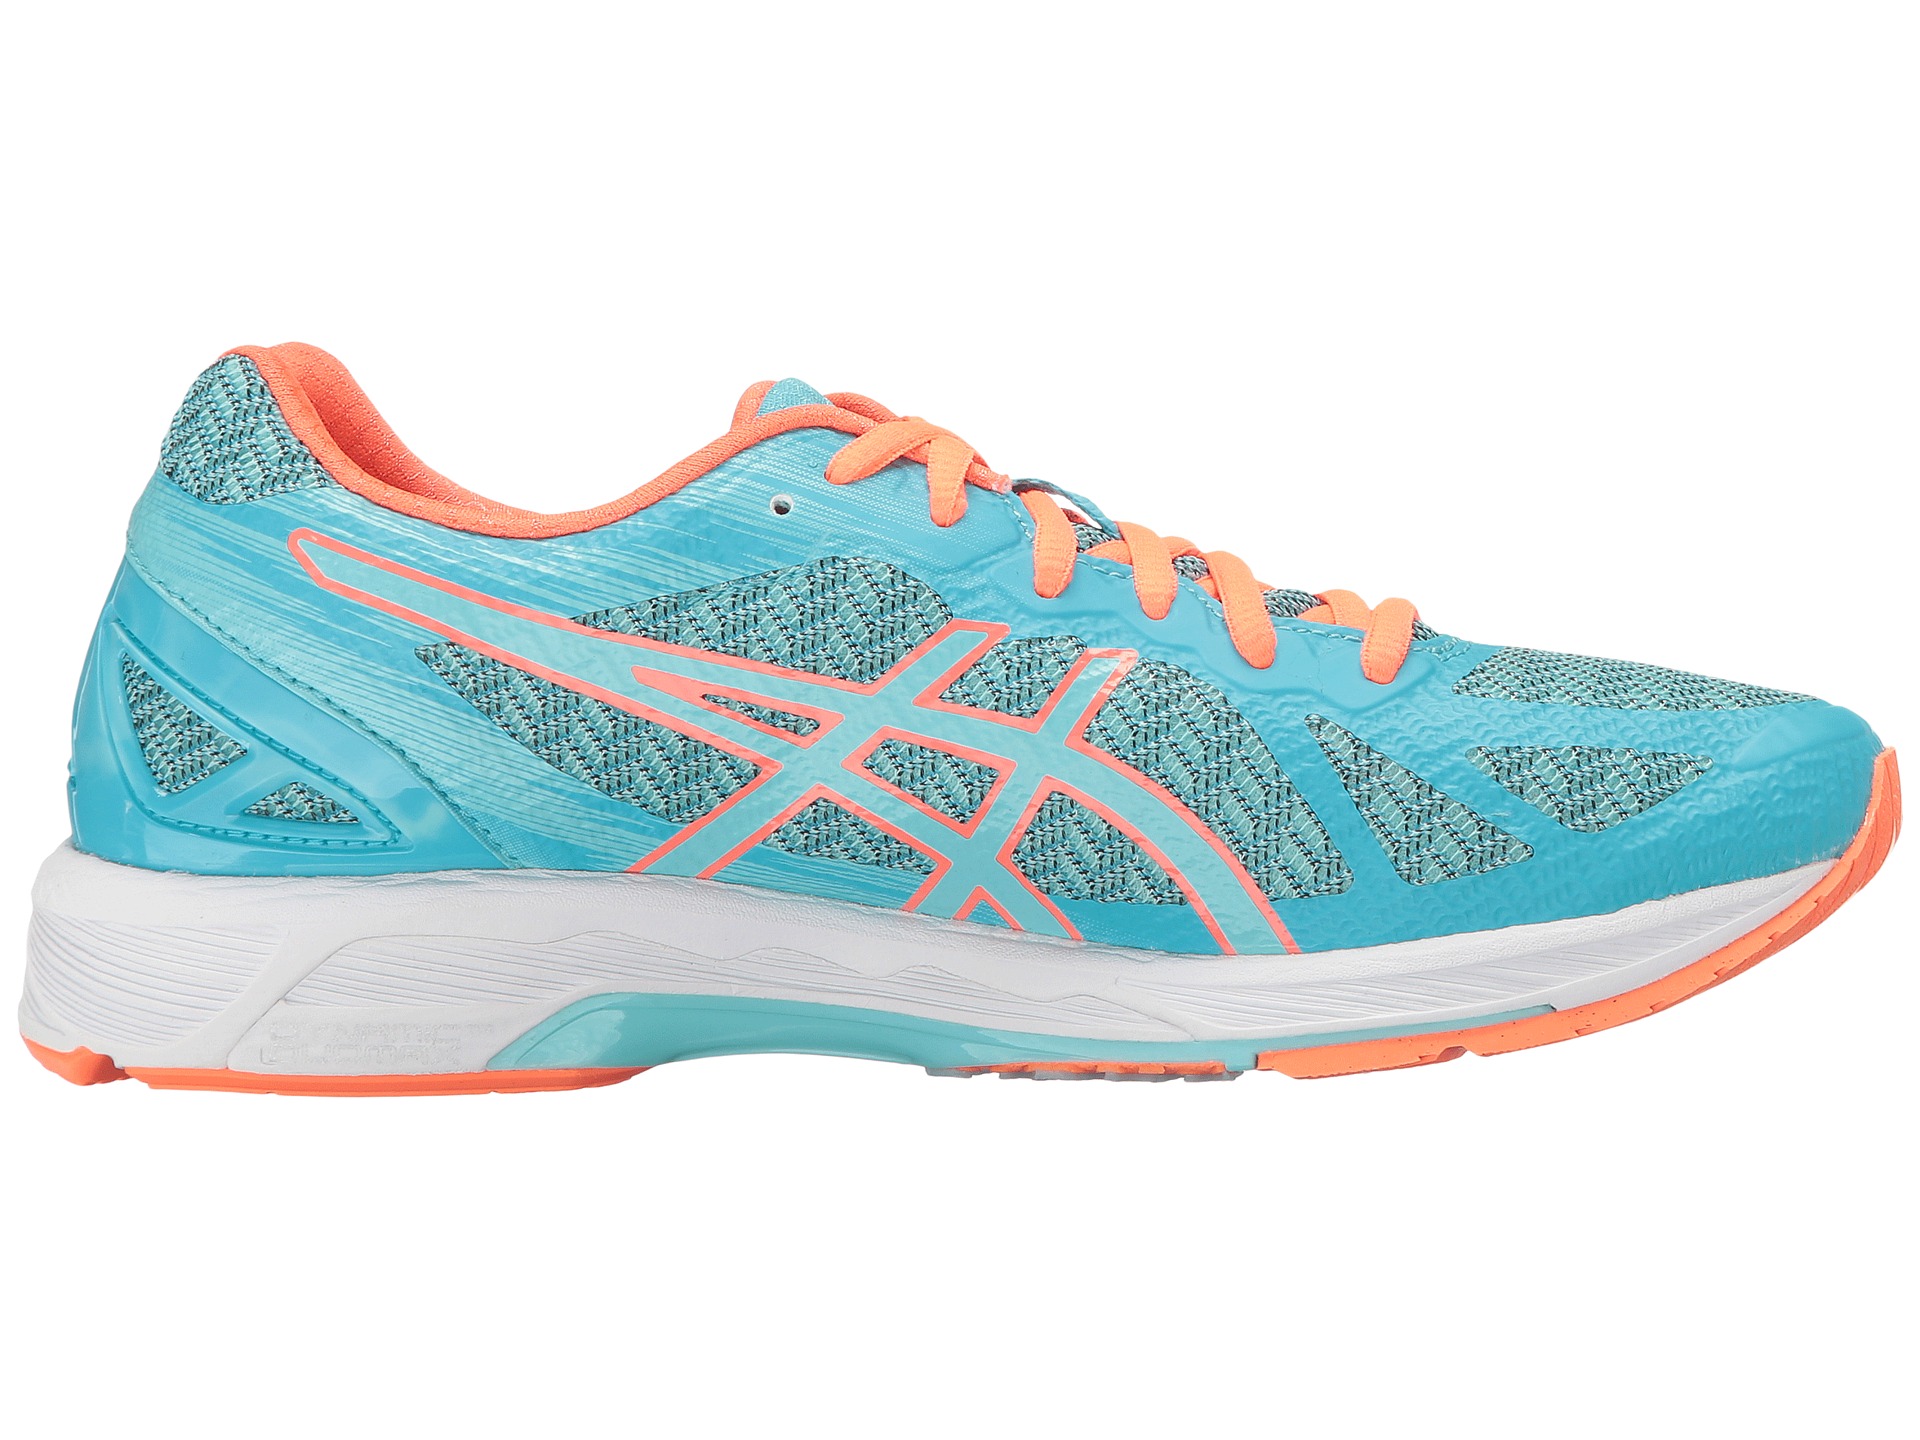 ASICS GEL-DS Trainer® 22 at Zappos.com